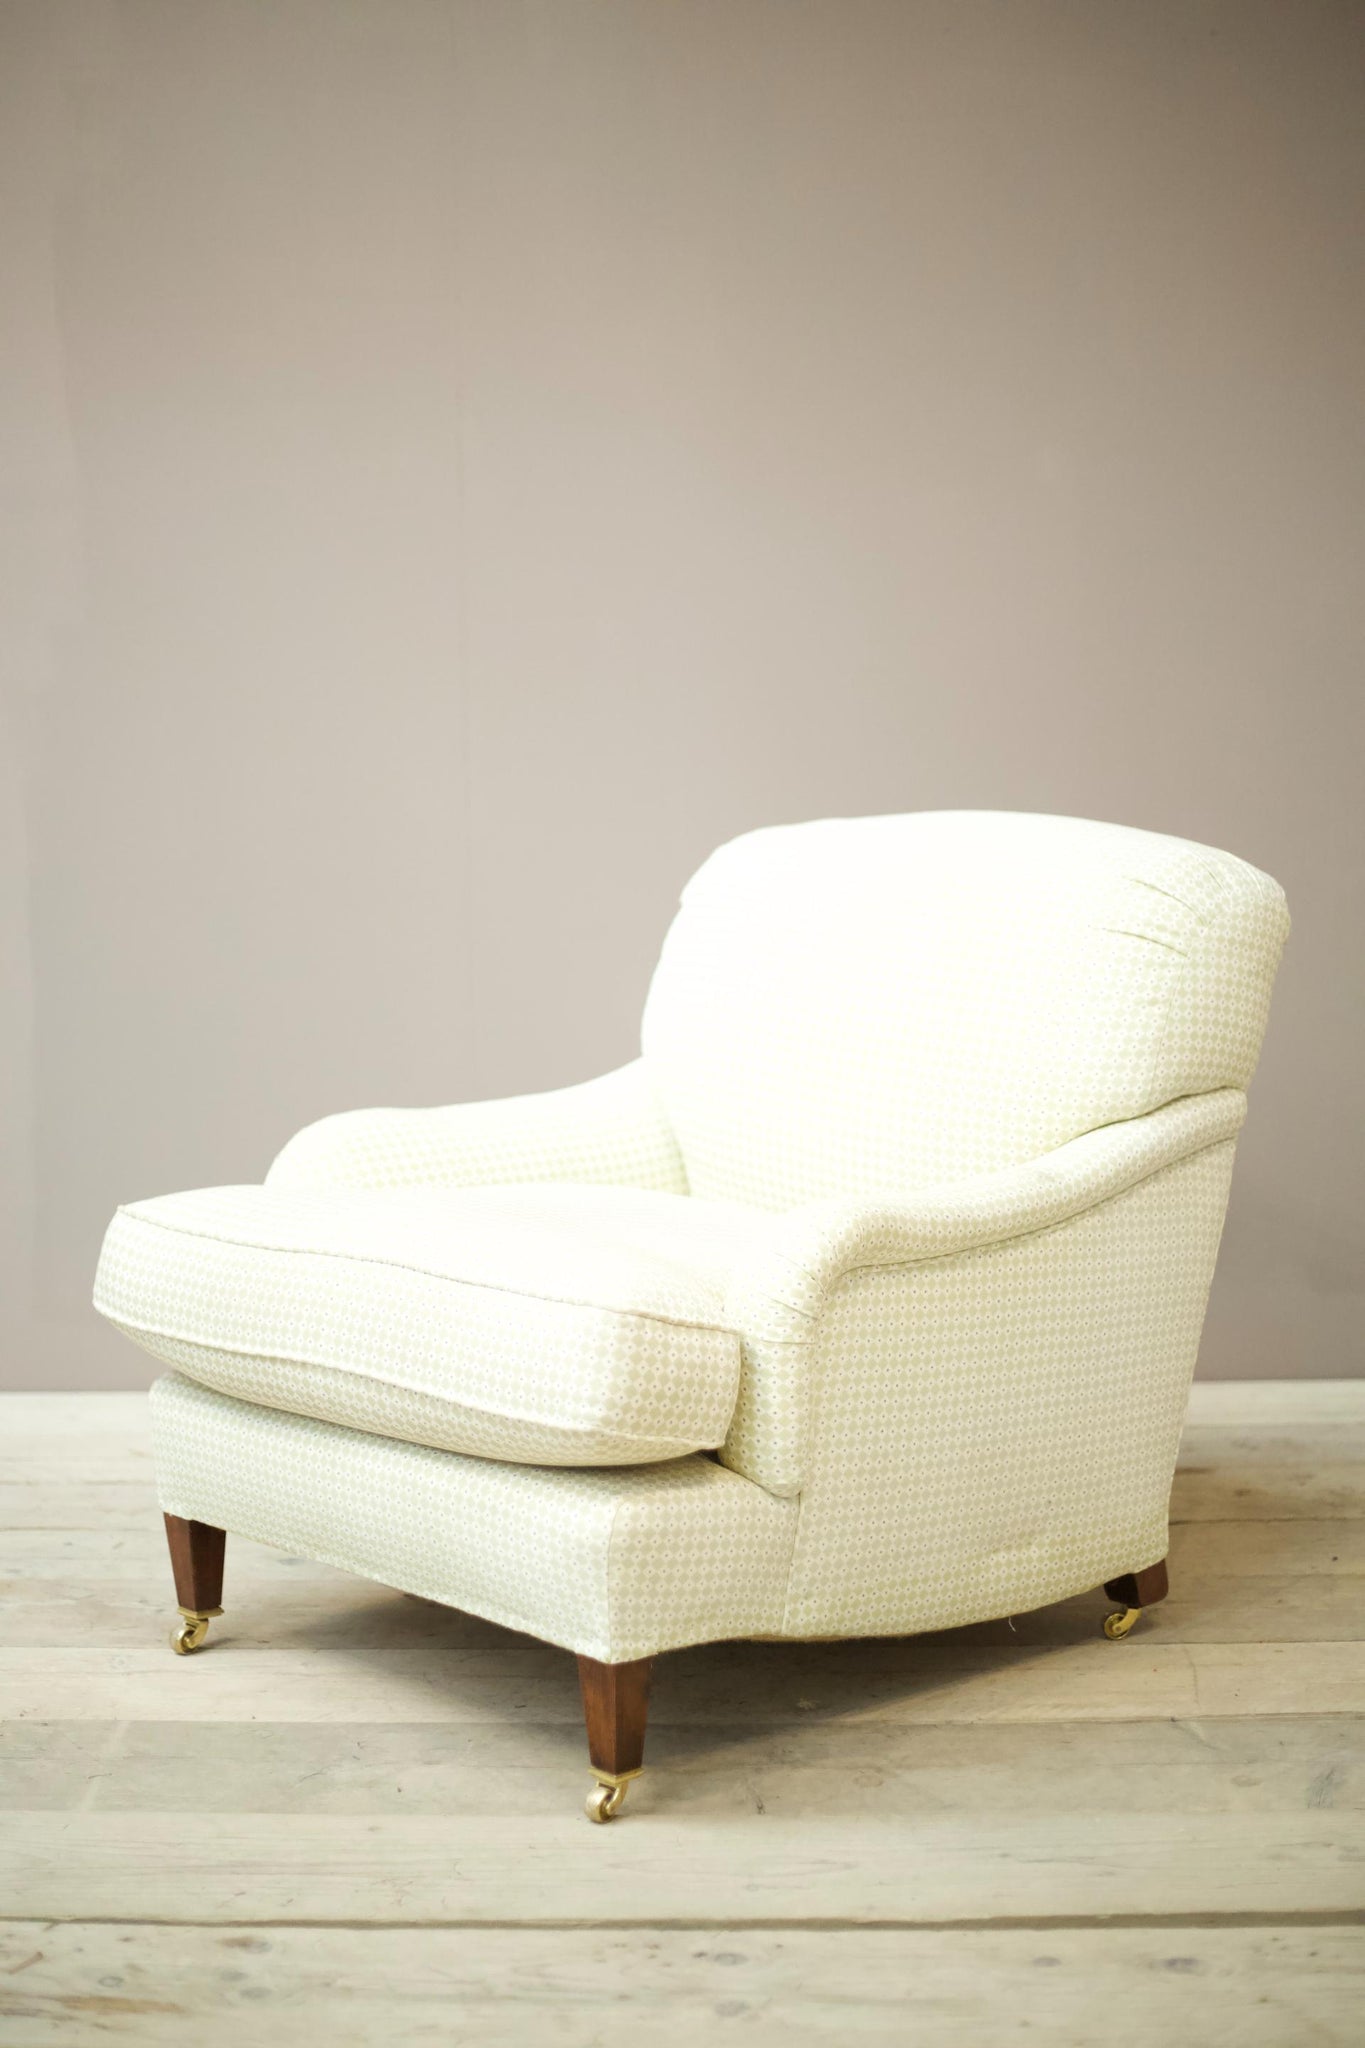 21st Century Bespoke made Howard style armchair by Sean Cooper